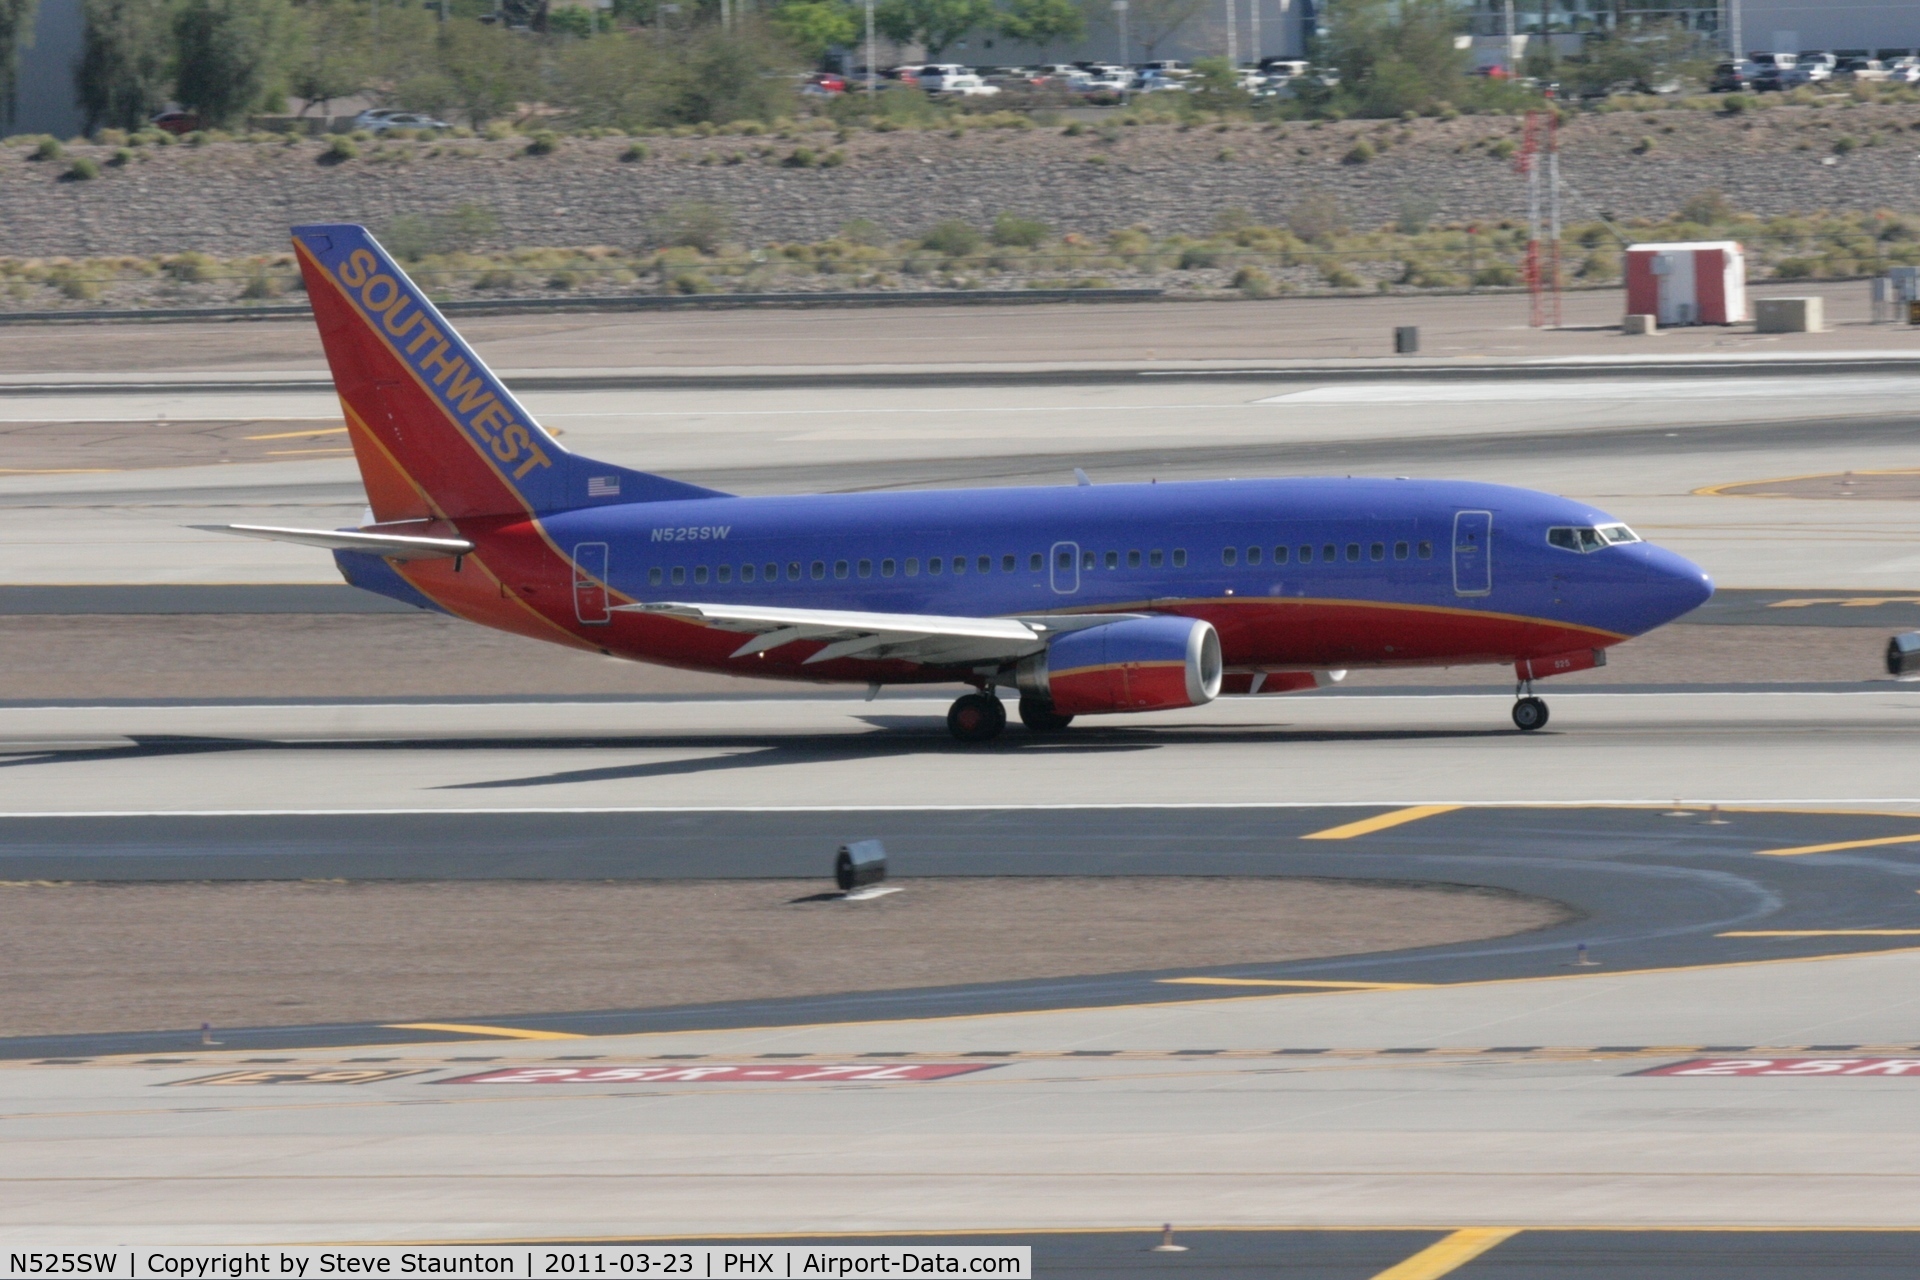 N525SW, 1992 Boeing 737-5H4 C/N 26567, Taken at Phoenix Sky Harbor Airport, in March 2011 whilst on an Aeroprint Aviation tour